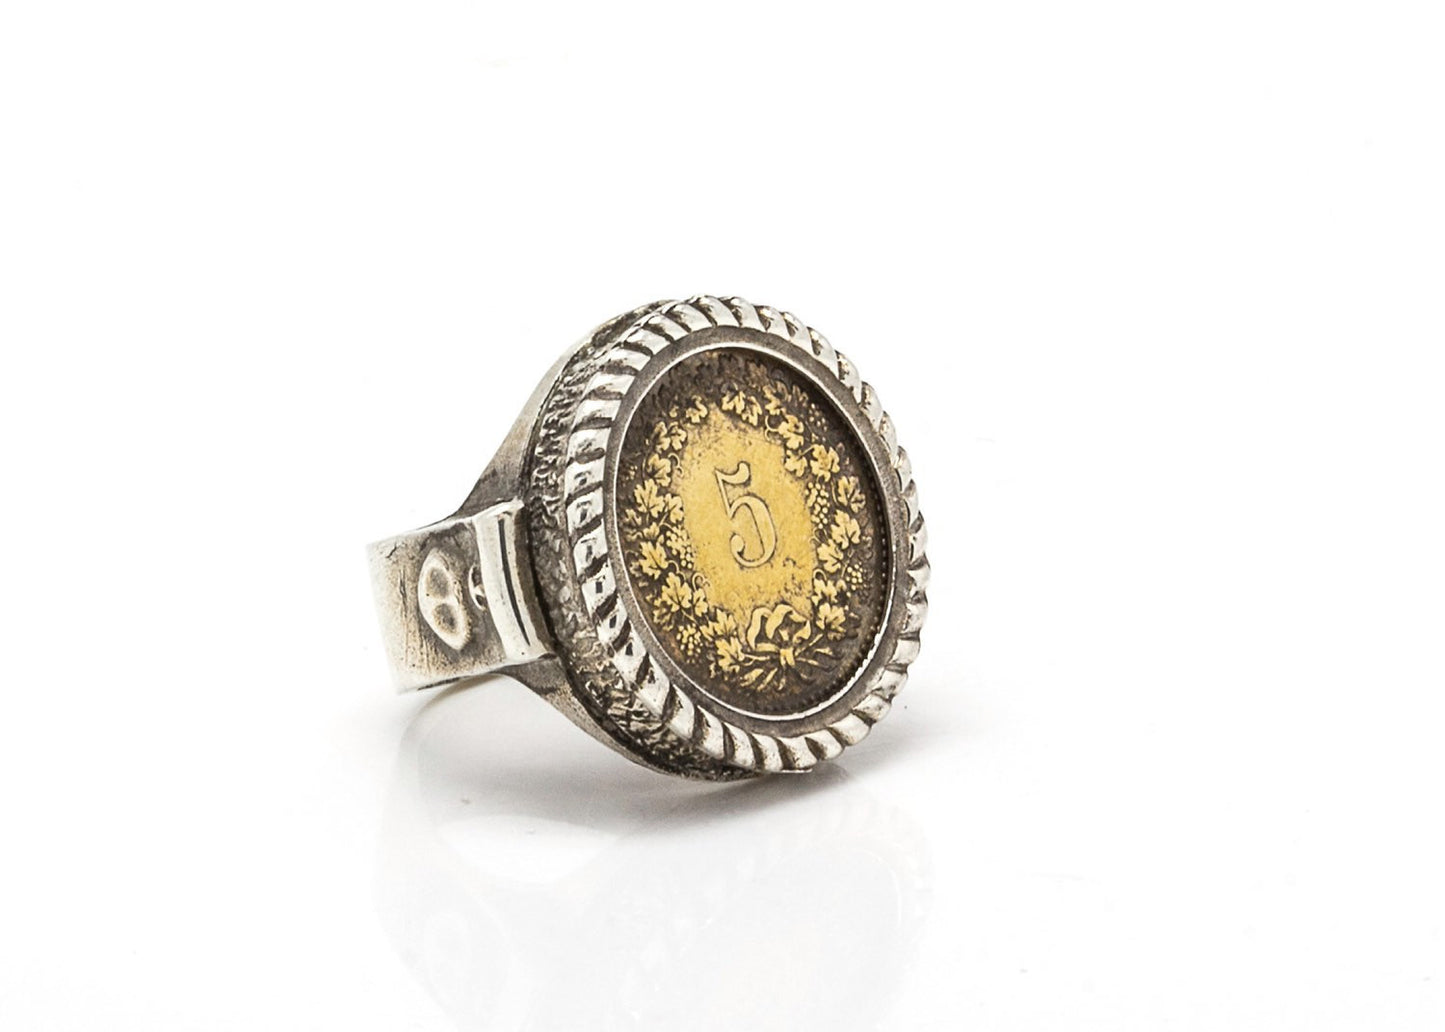 Swiss Coin Ring with the 5 Rappen Coin of Switzerland